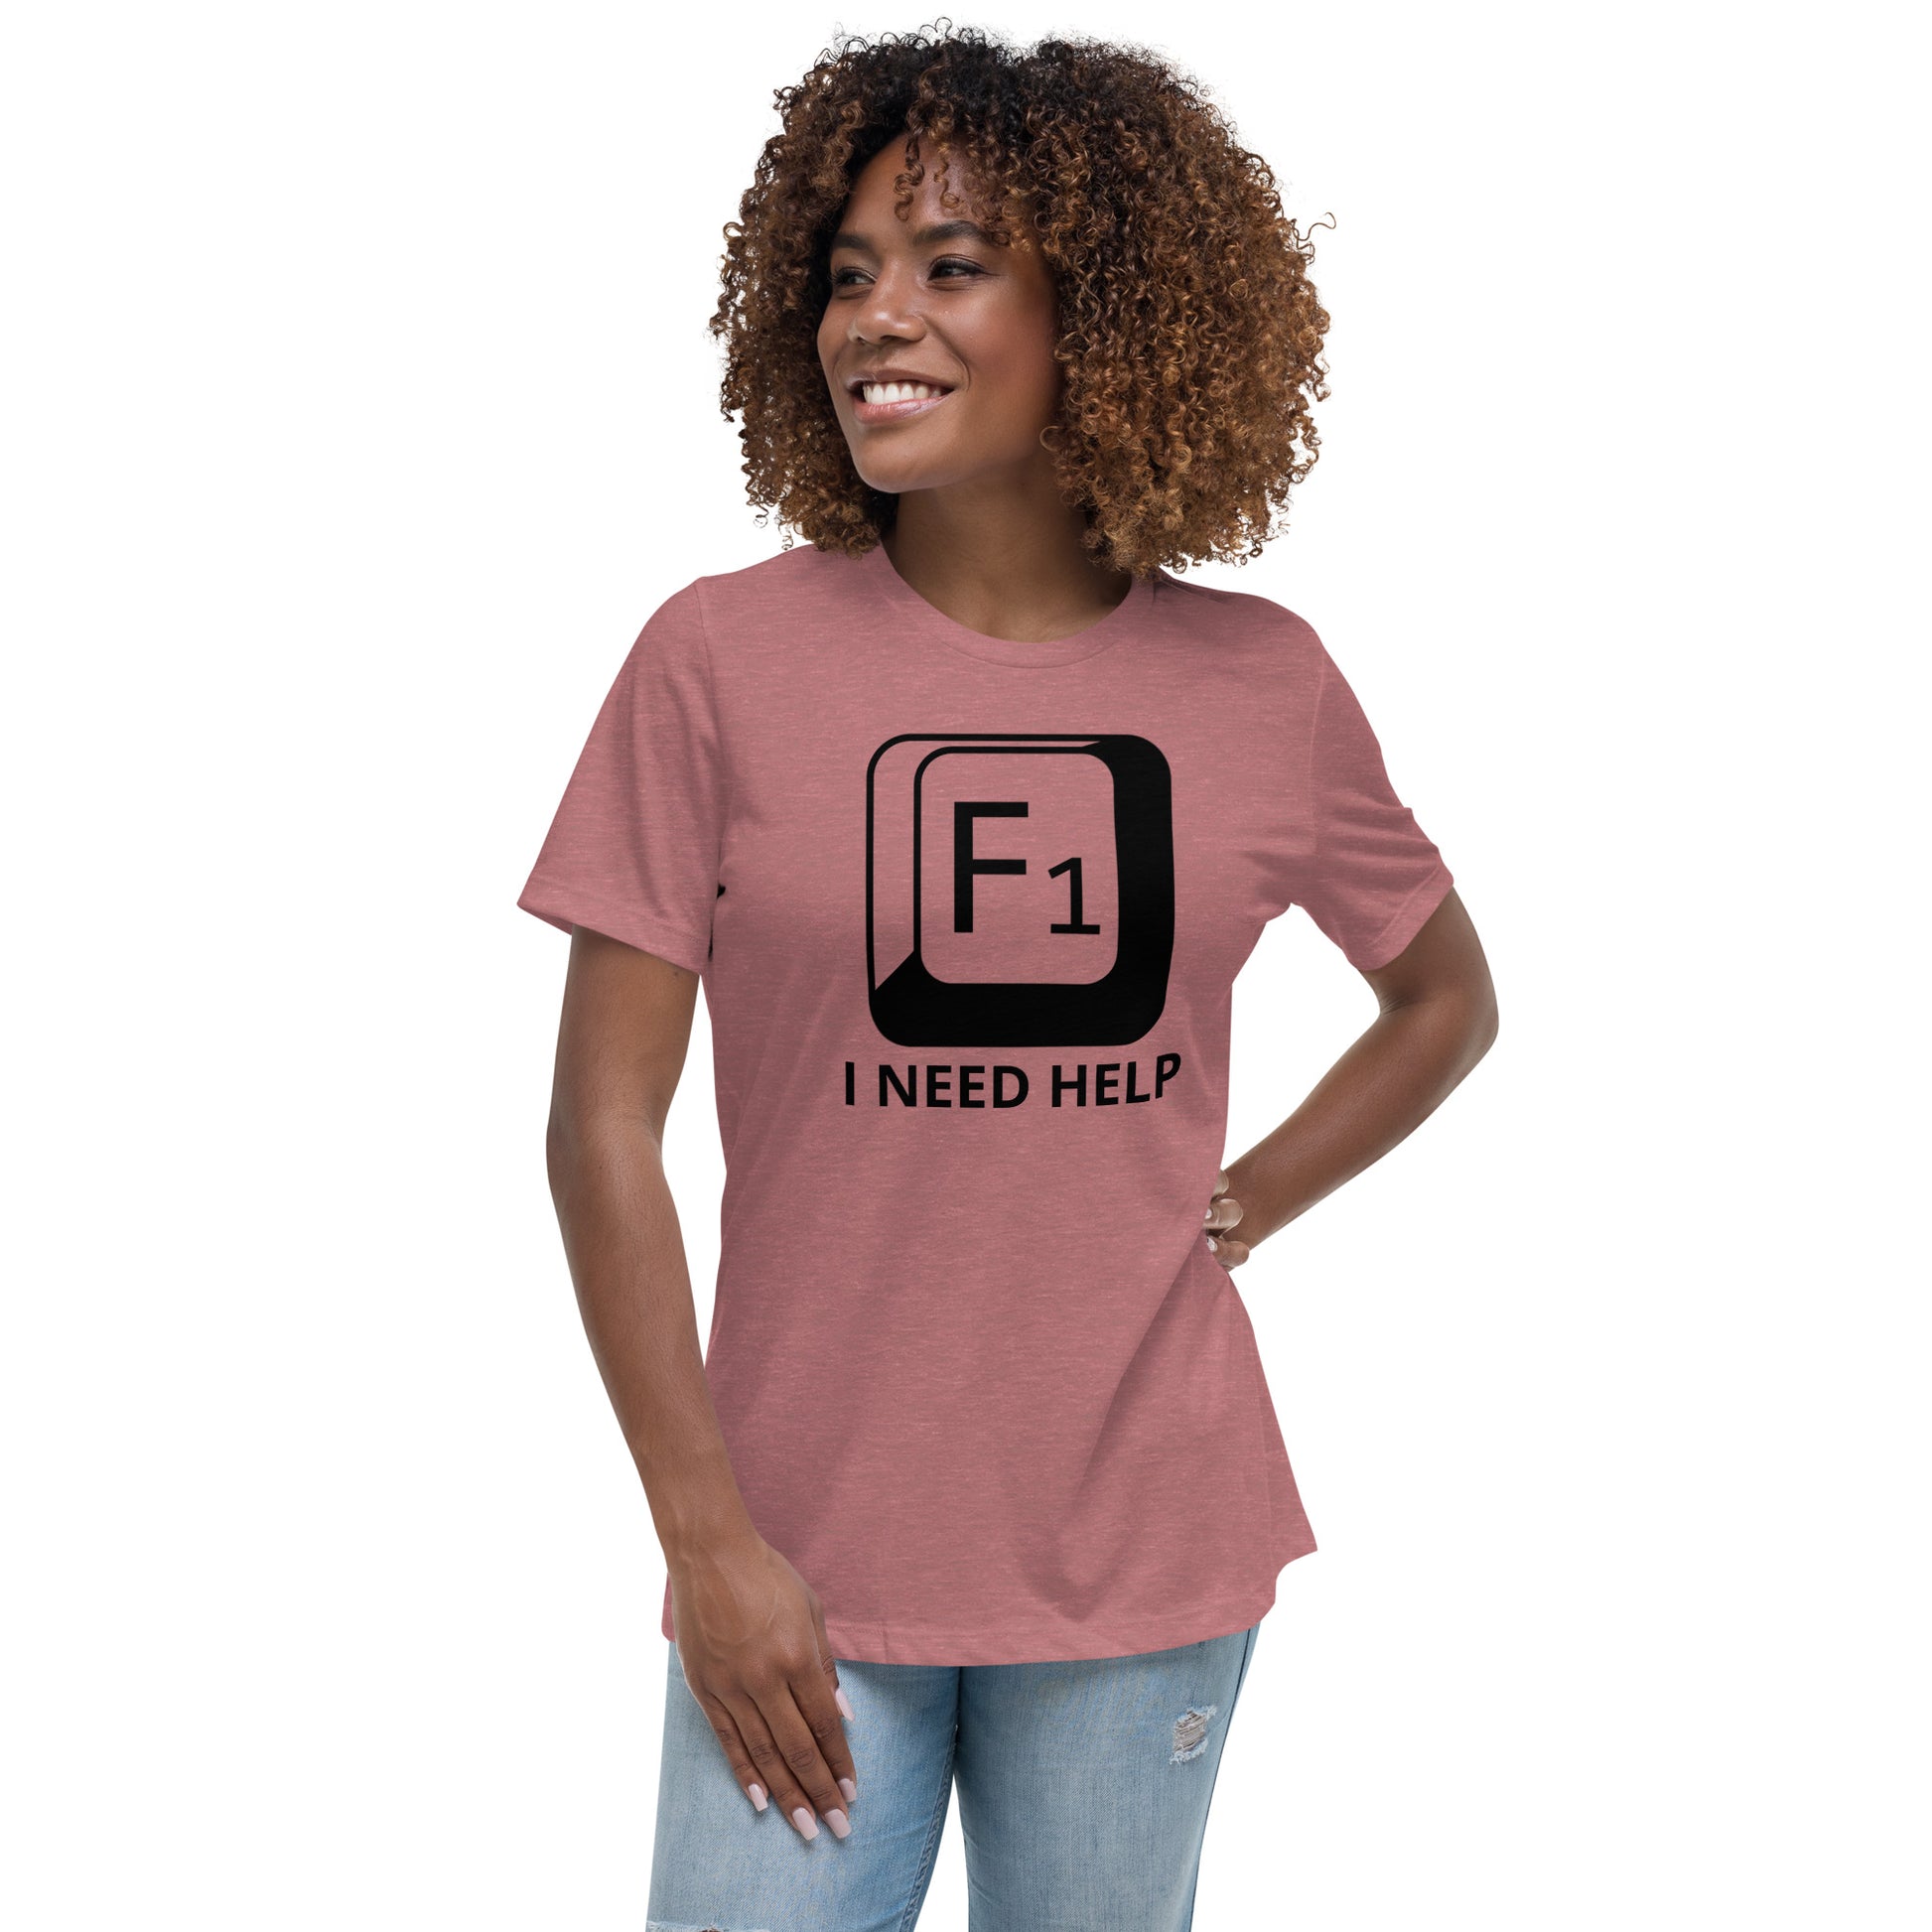 Woman with mauve t-shirt with picture of "F1" key and text "I need help"